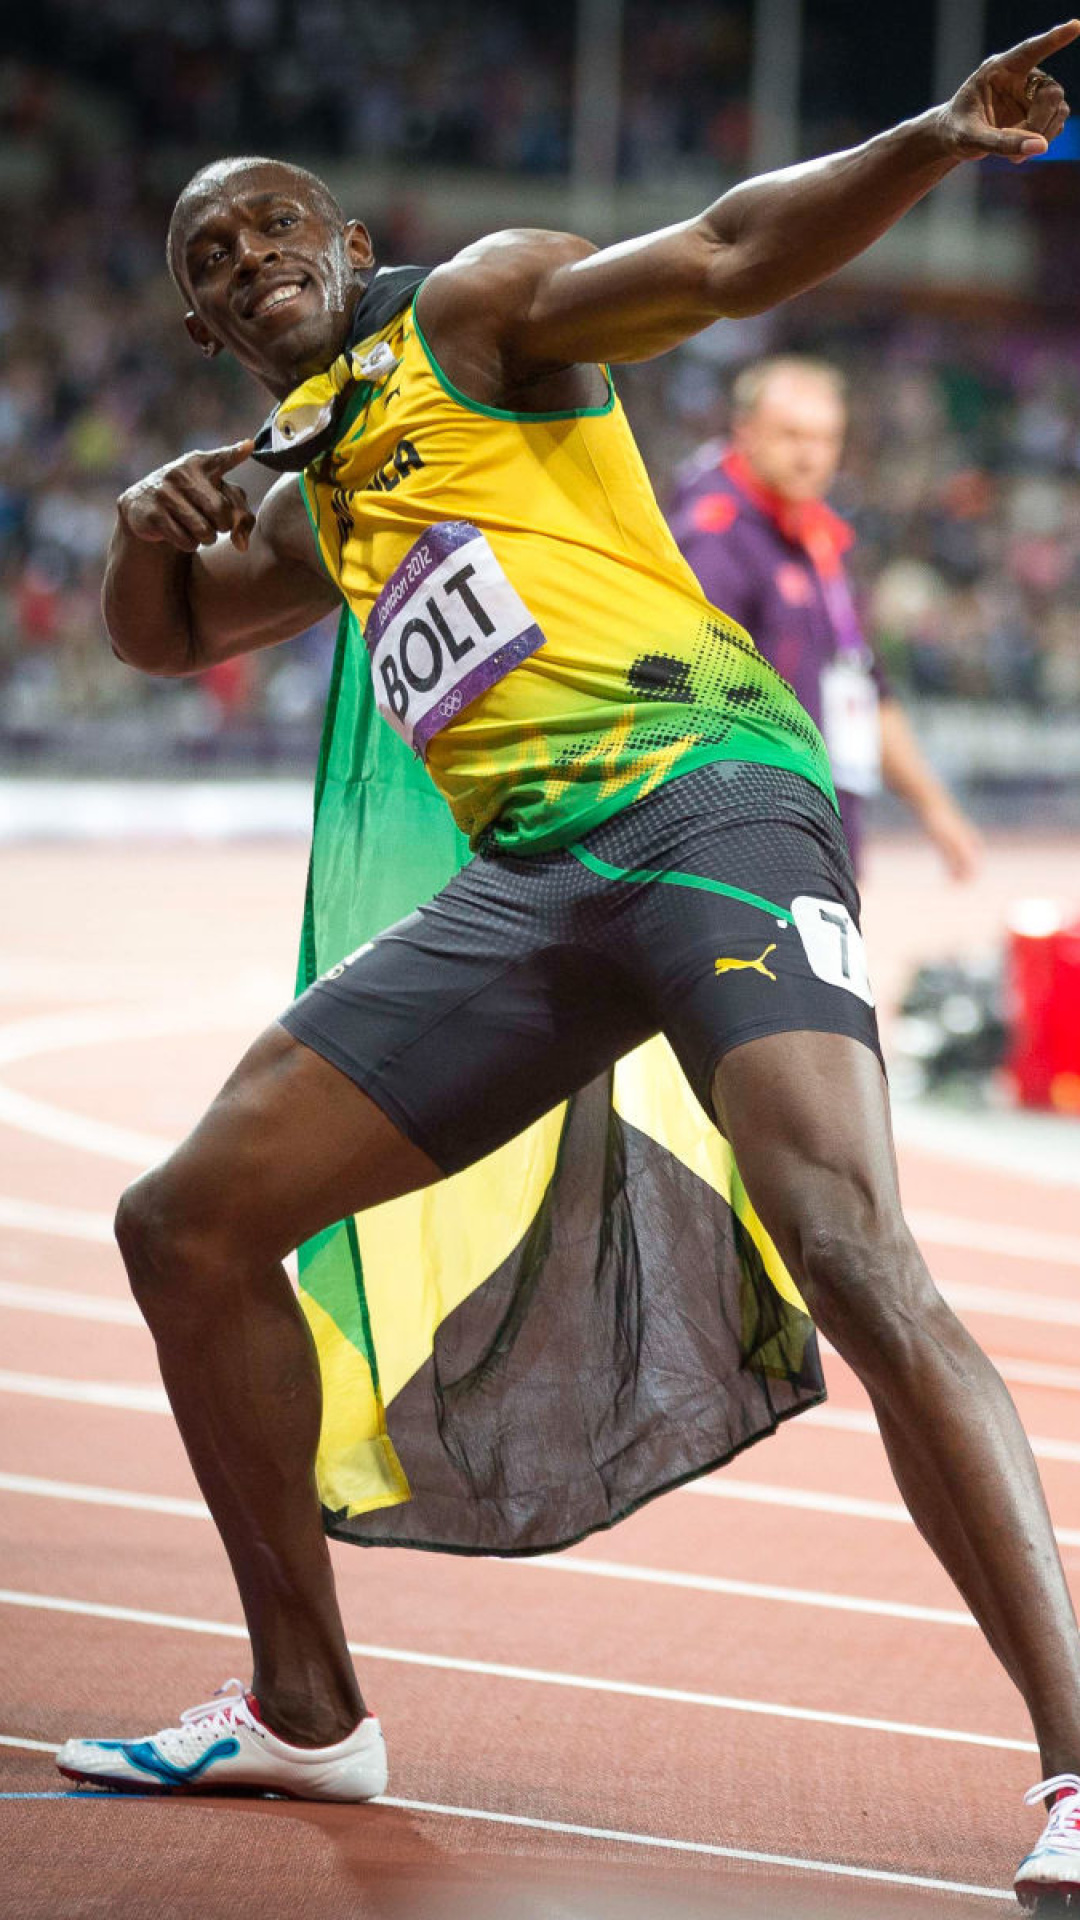 Usain Bolt won medals in the Olympics wallpaper 1080x1920